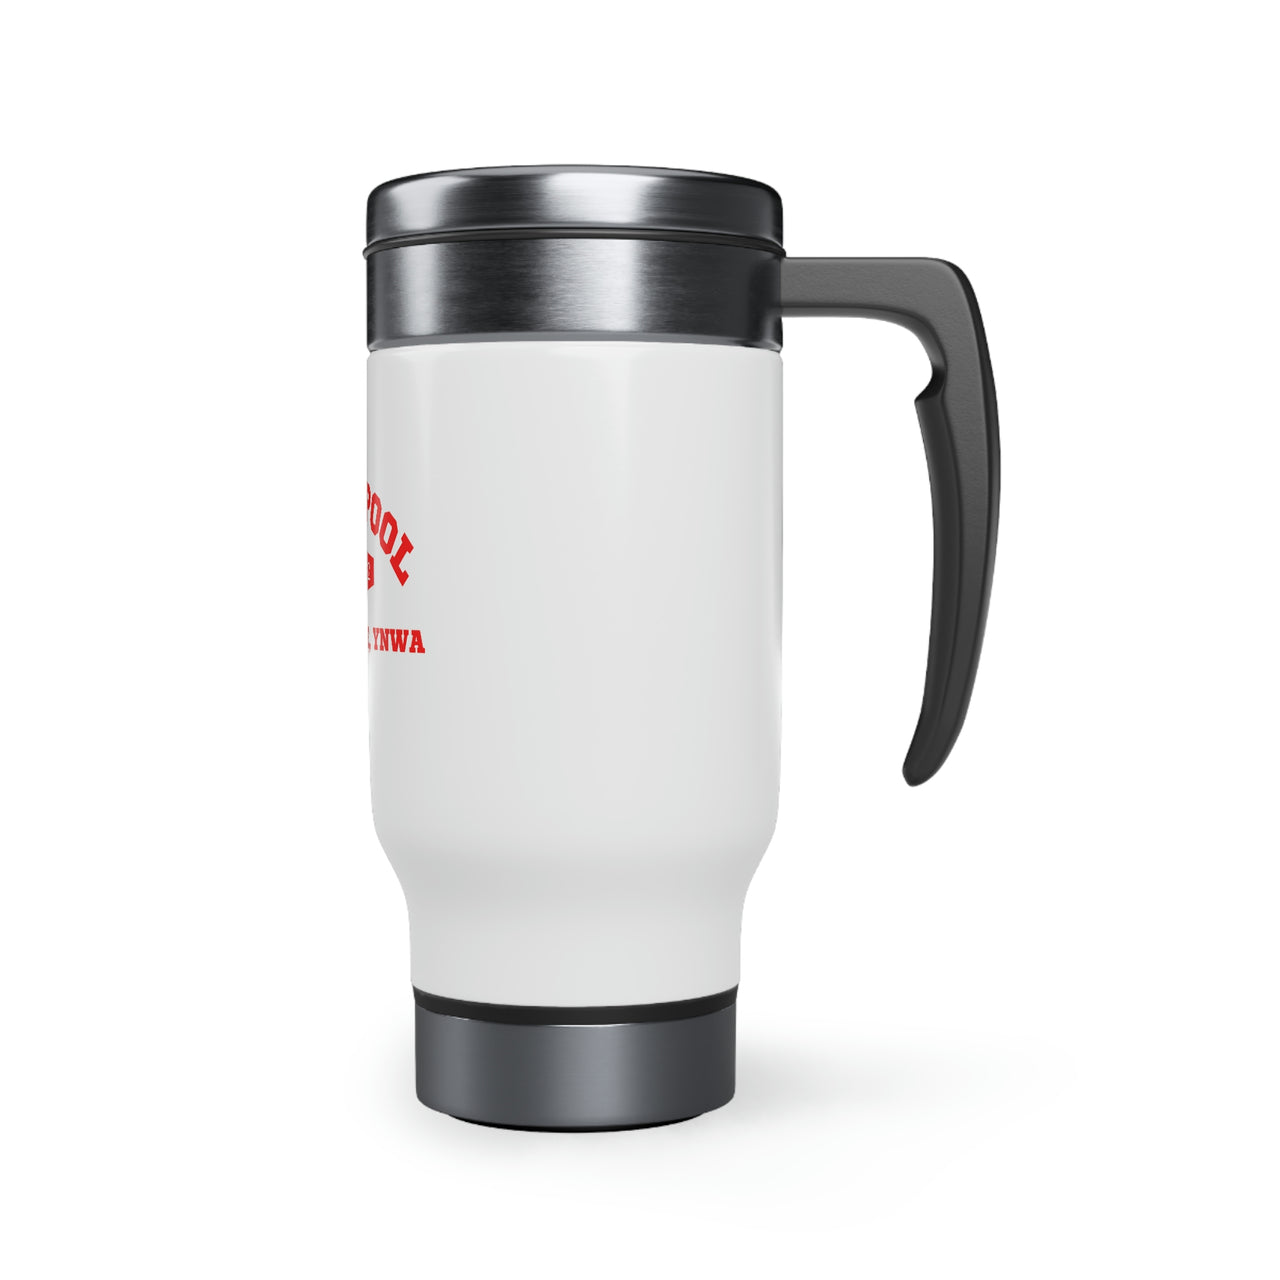 Liverpool Stainless Steel Travel Mug with Handle, 14oz